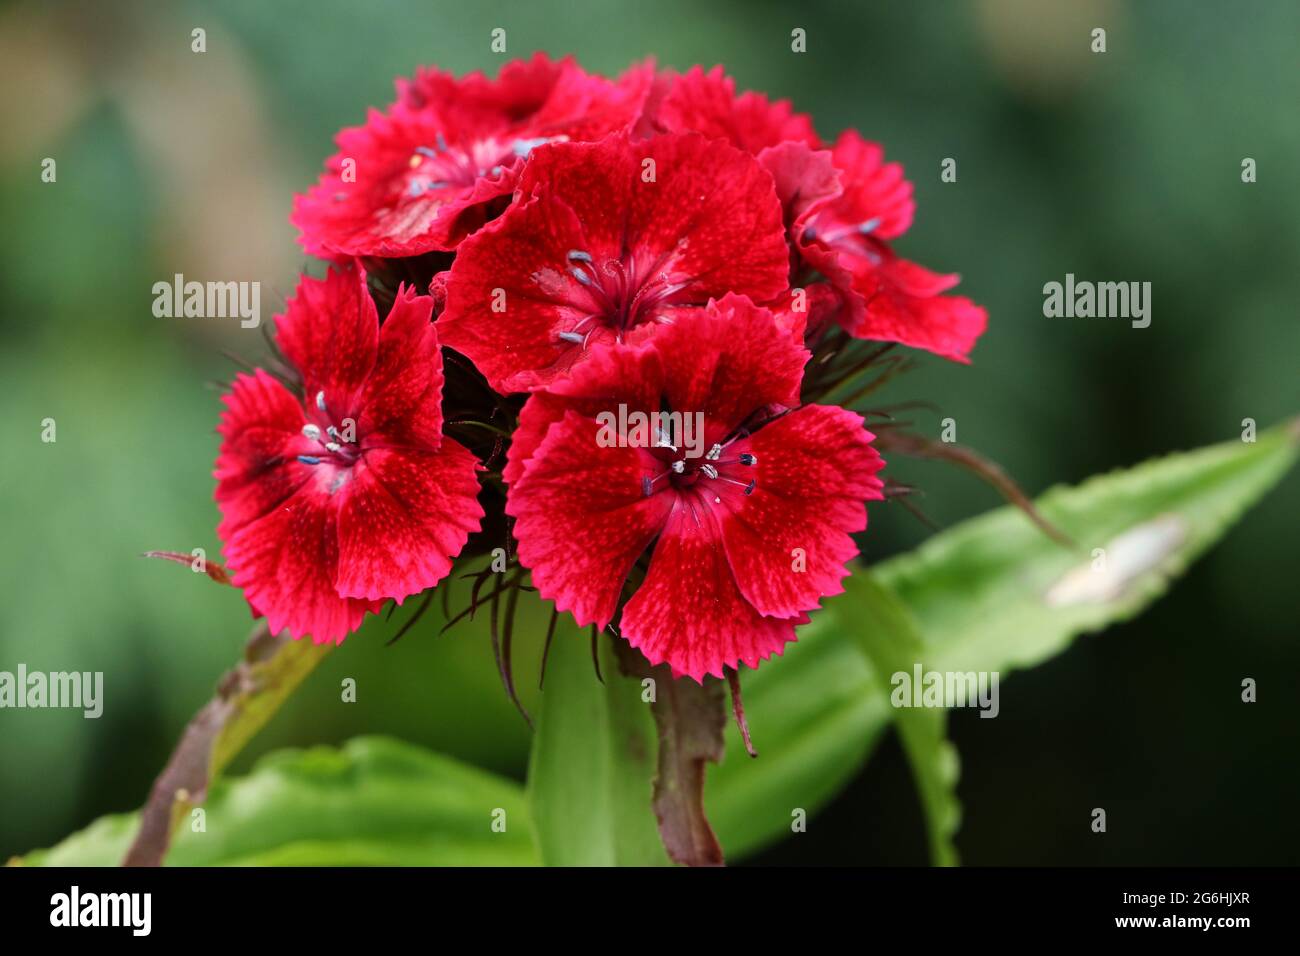 The flowers of a Sweet William plant, Dianthus barbatus, growing in a cottage garden in the UK. Stock Photo